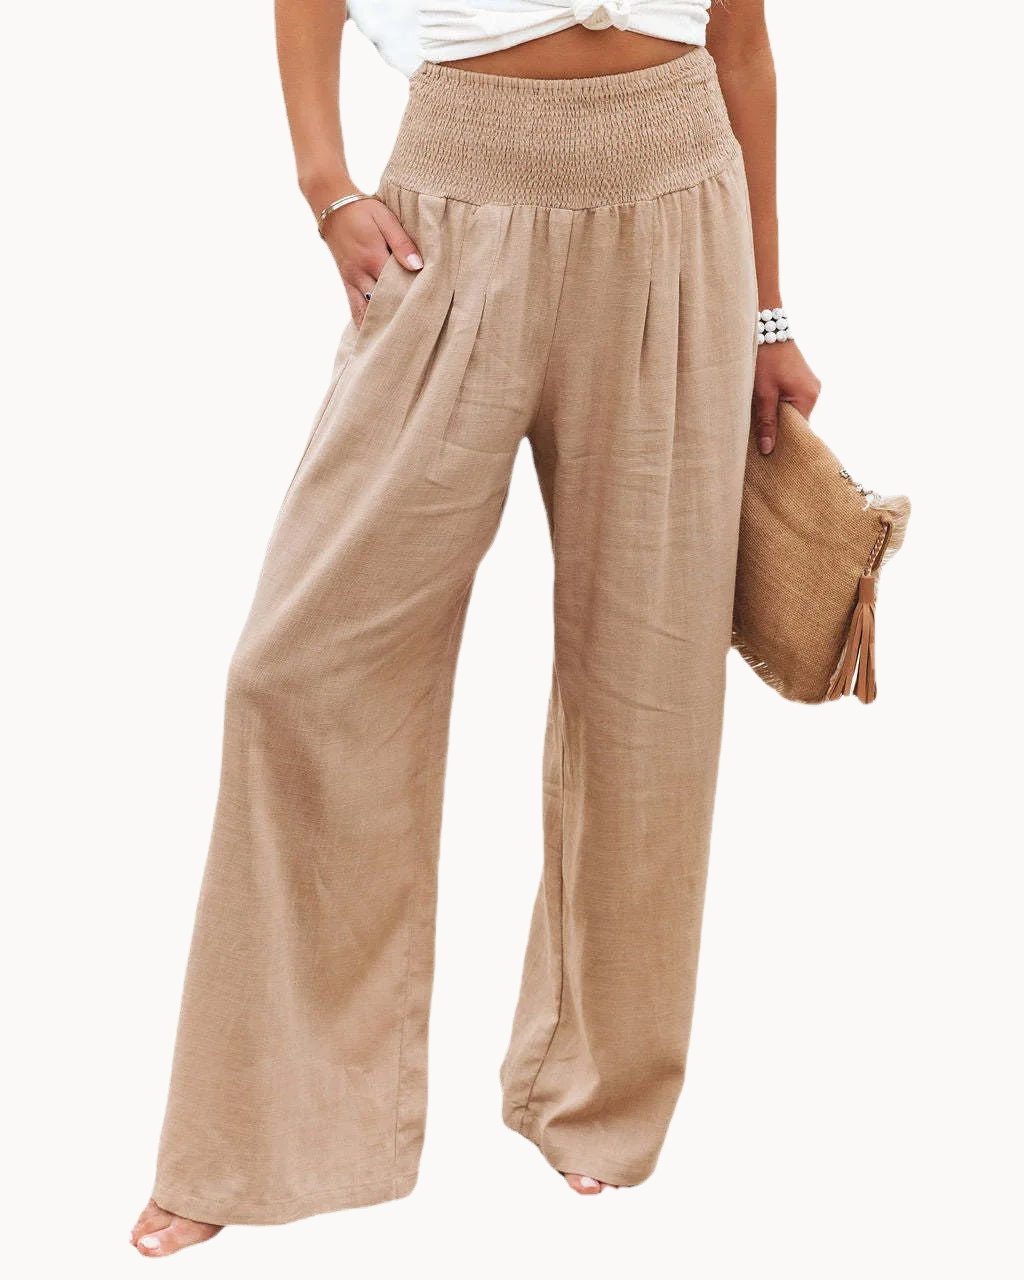 Summer Flair Cotton Linen Womens Pants With Pockets